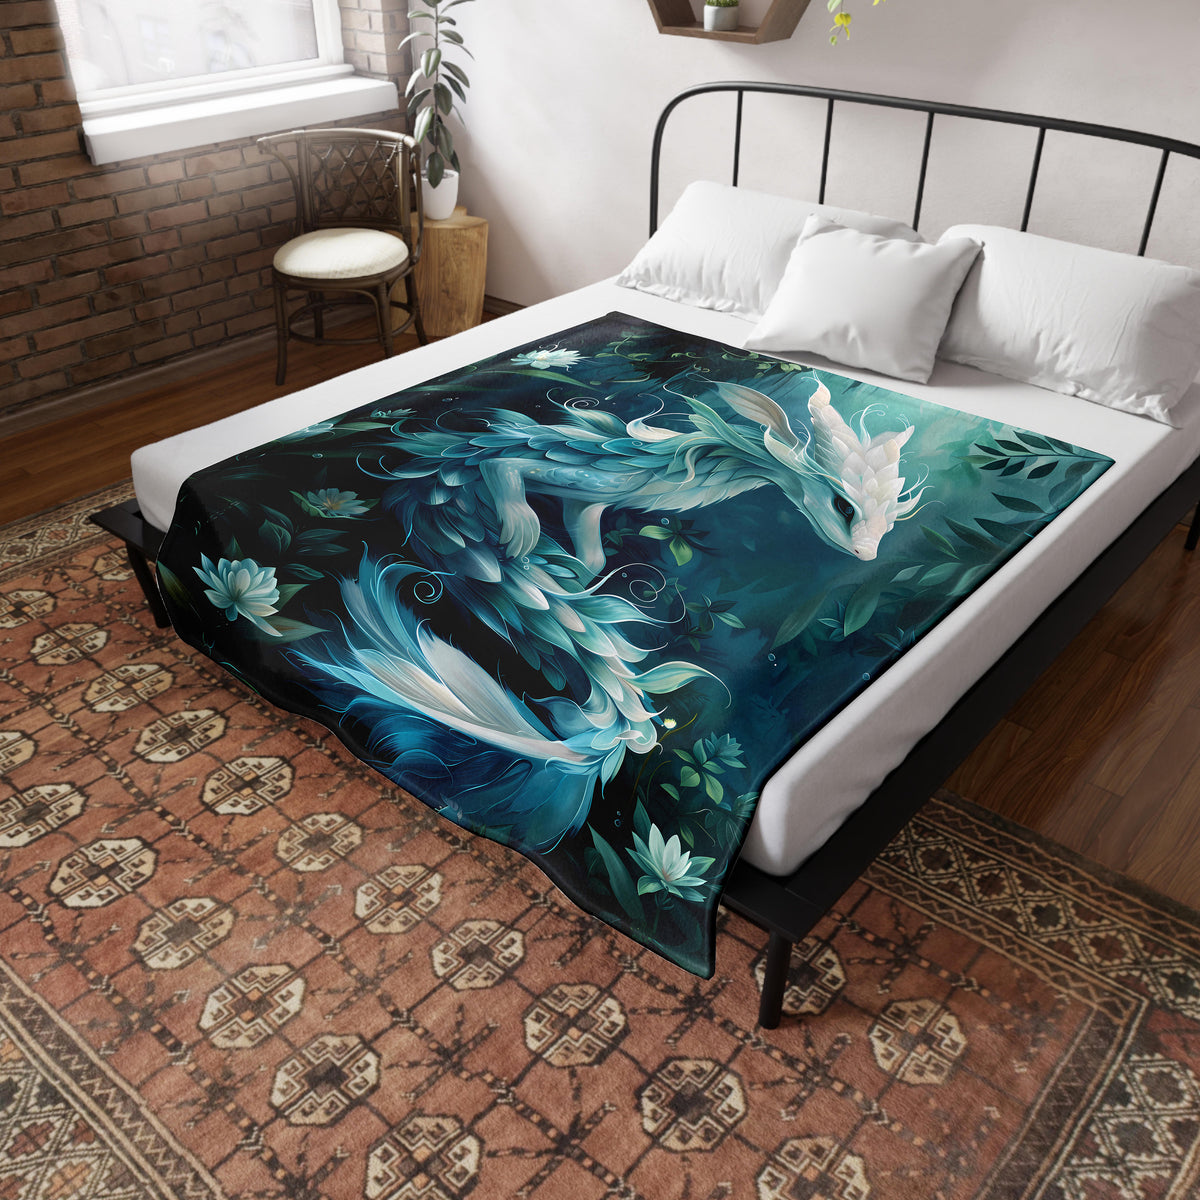 a bed with a painting on it in a room